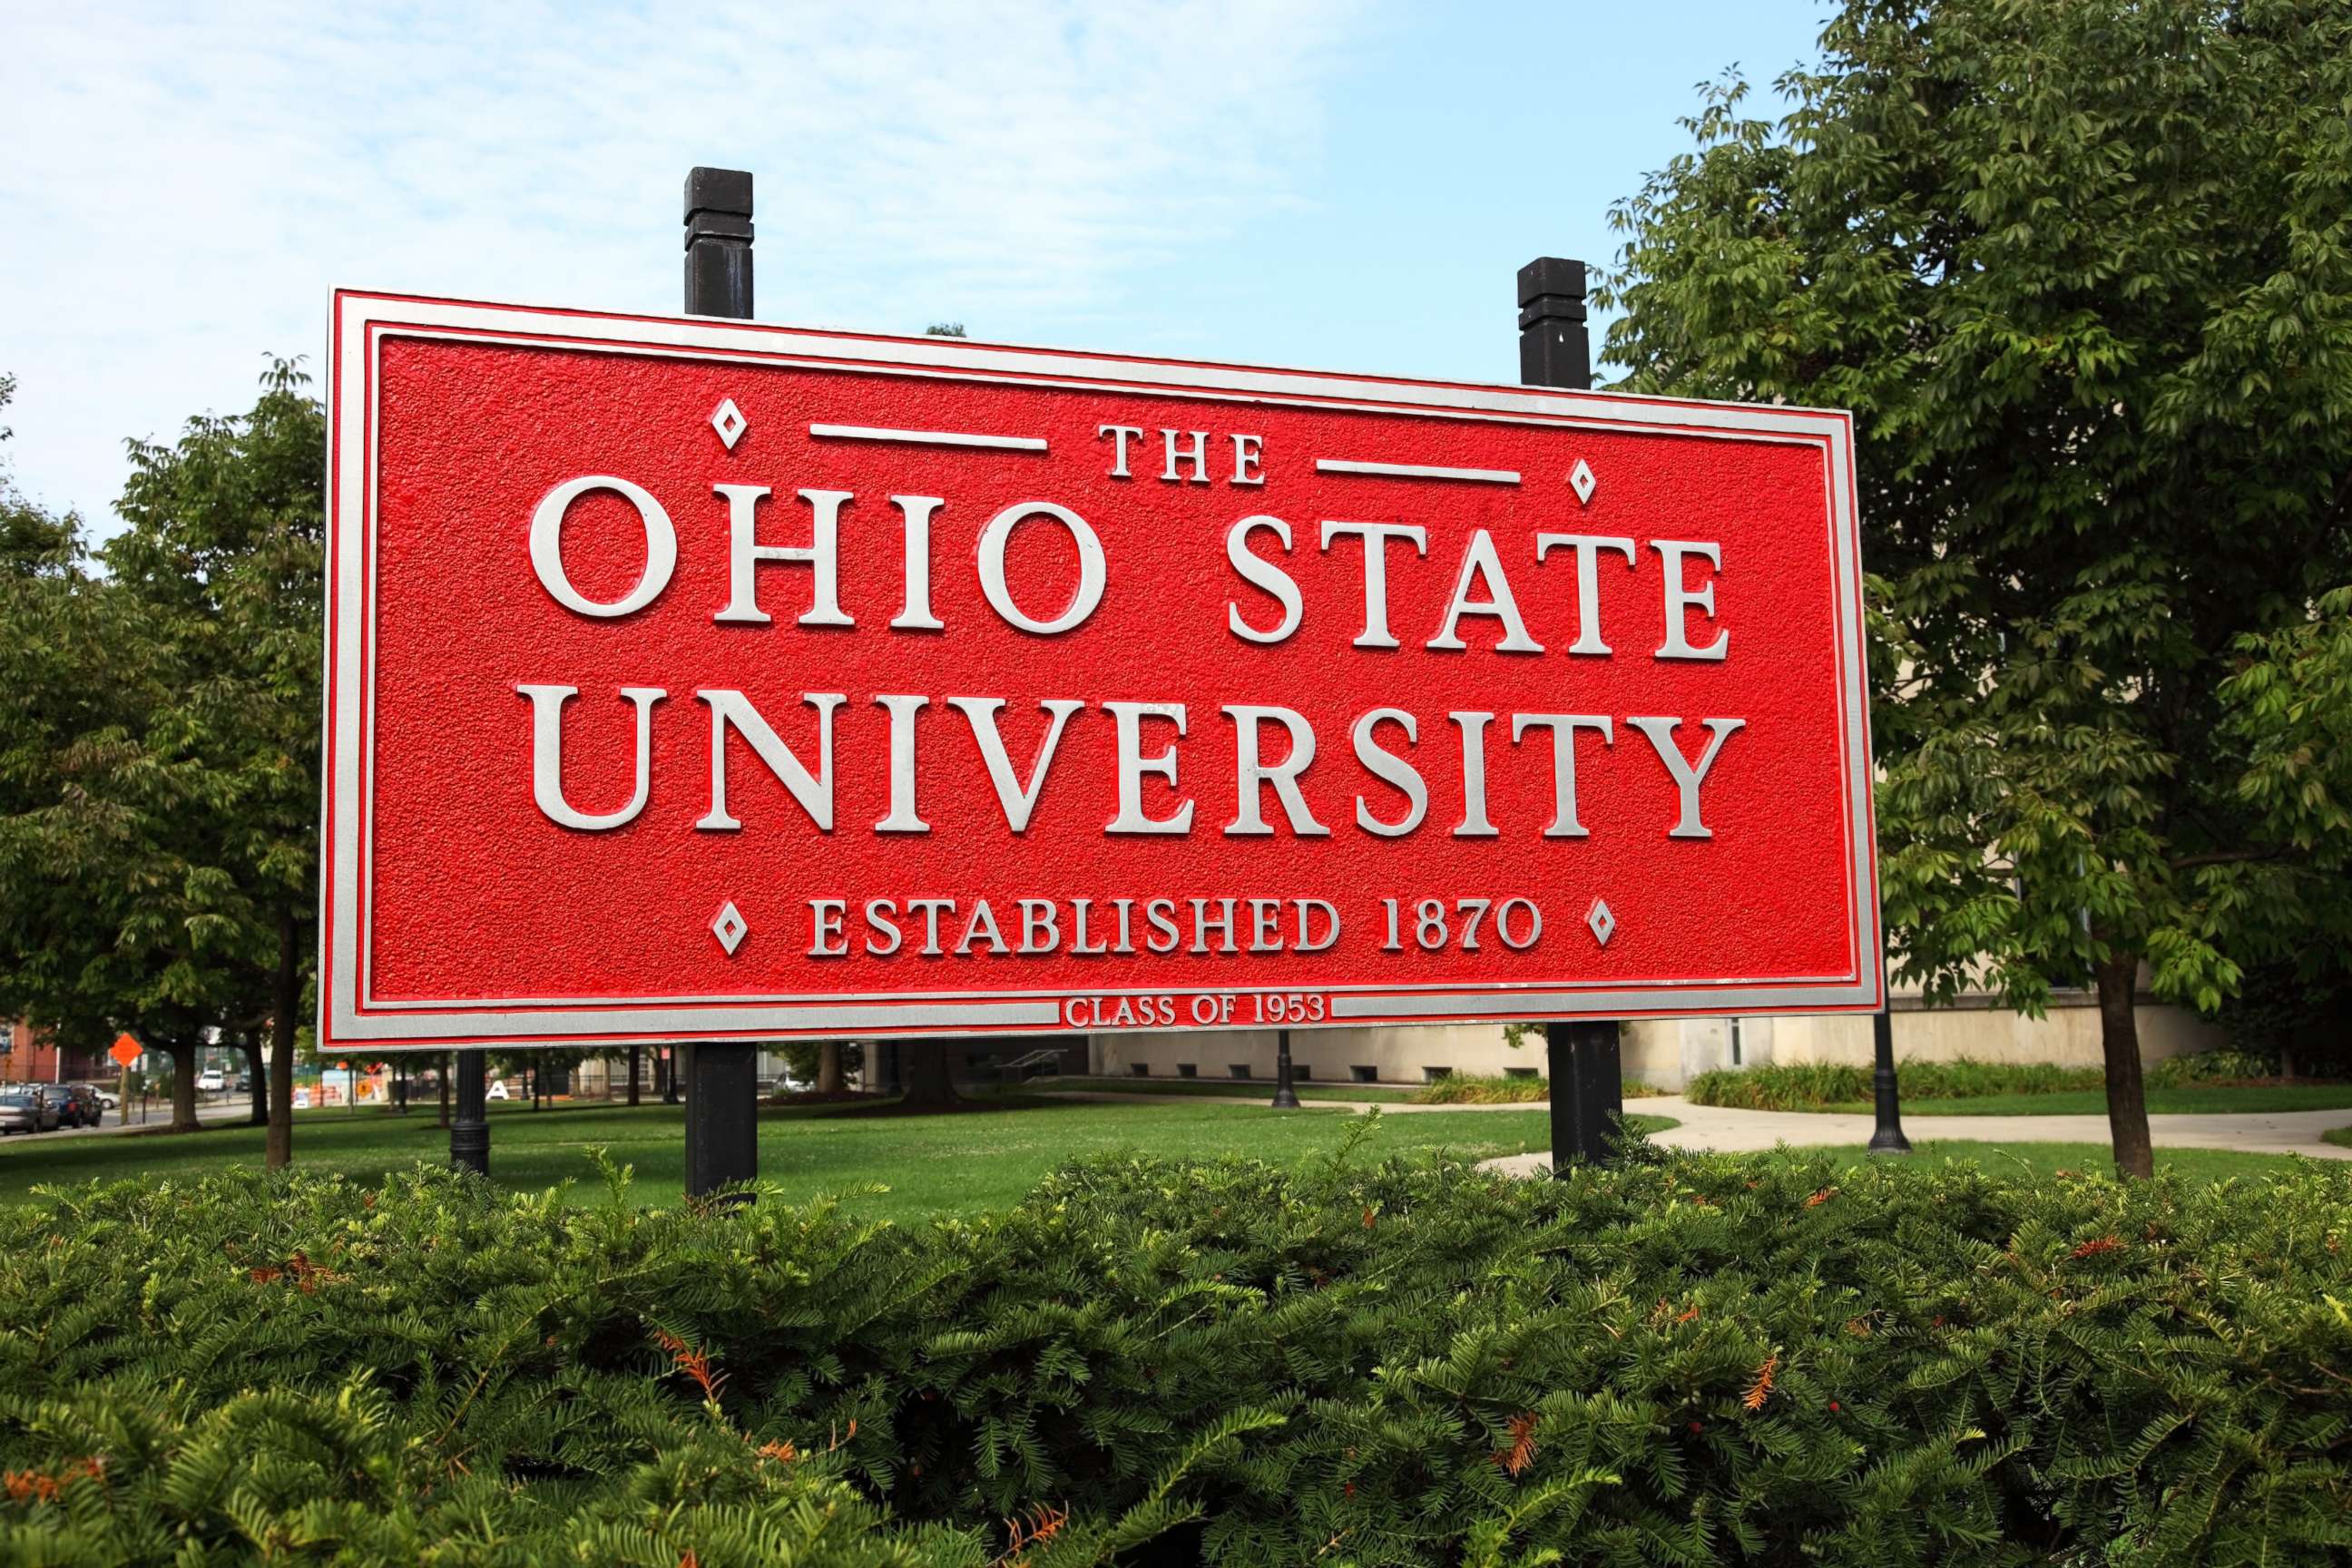 PHOTO: The Ohio State University, commonly referred to as Ohio State or OSU, located in Columbus, Ohio.